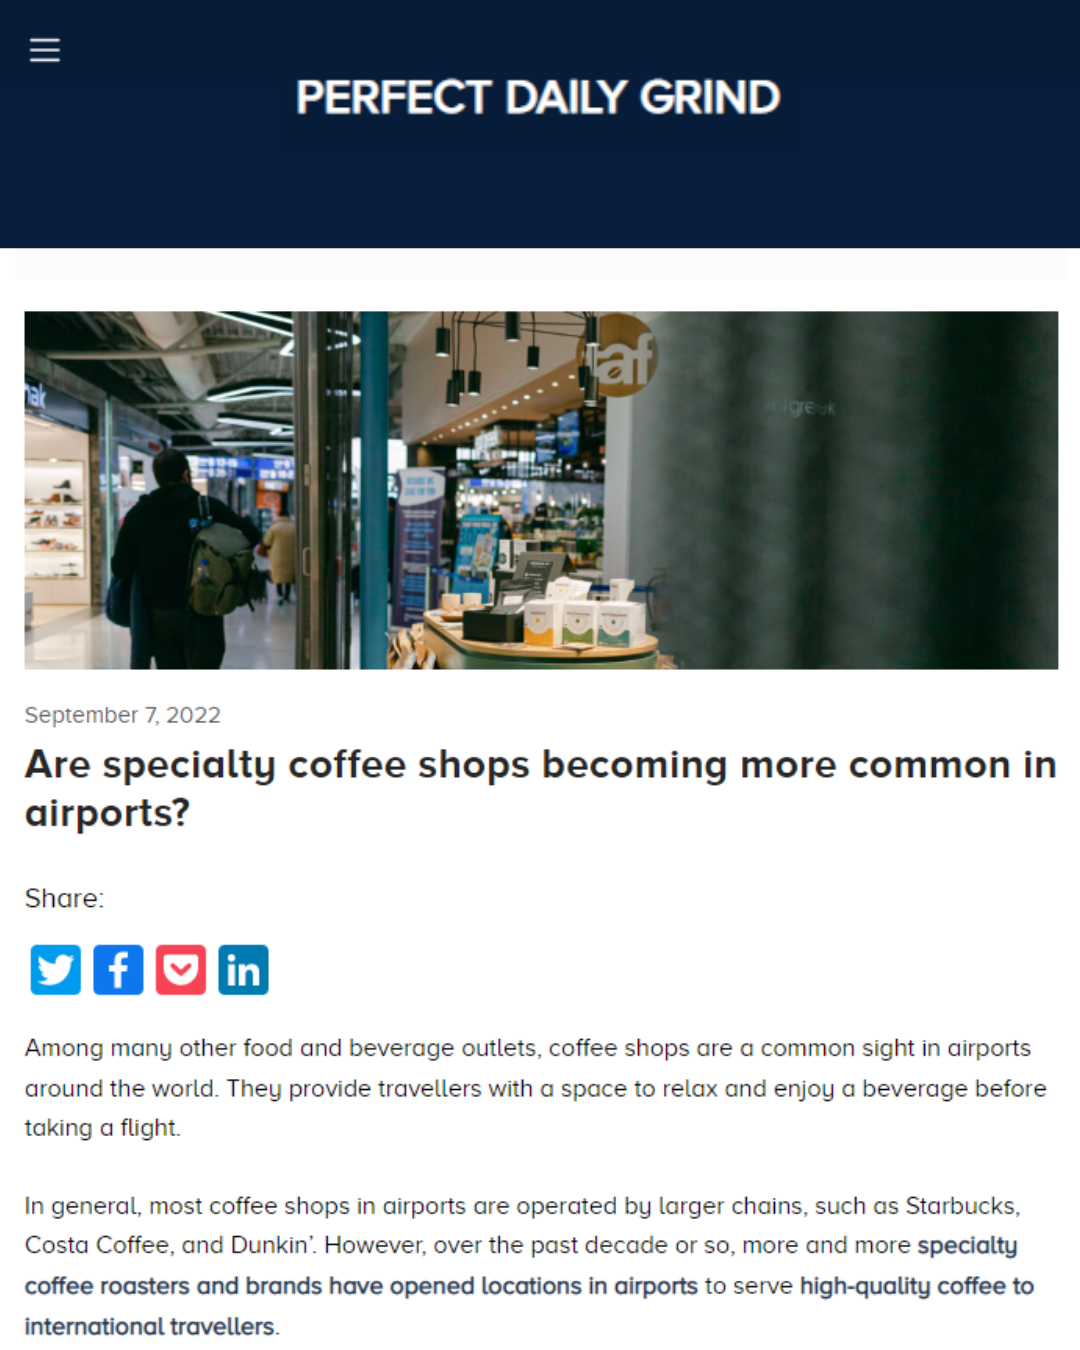 September 2022, Perfect Daily Grind, Are specialty coffee shops becoming more common in airports?